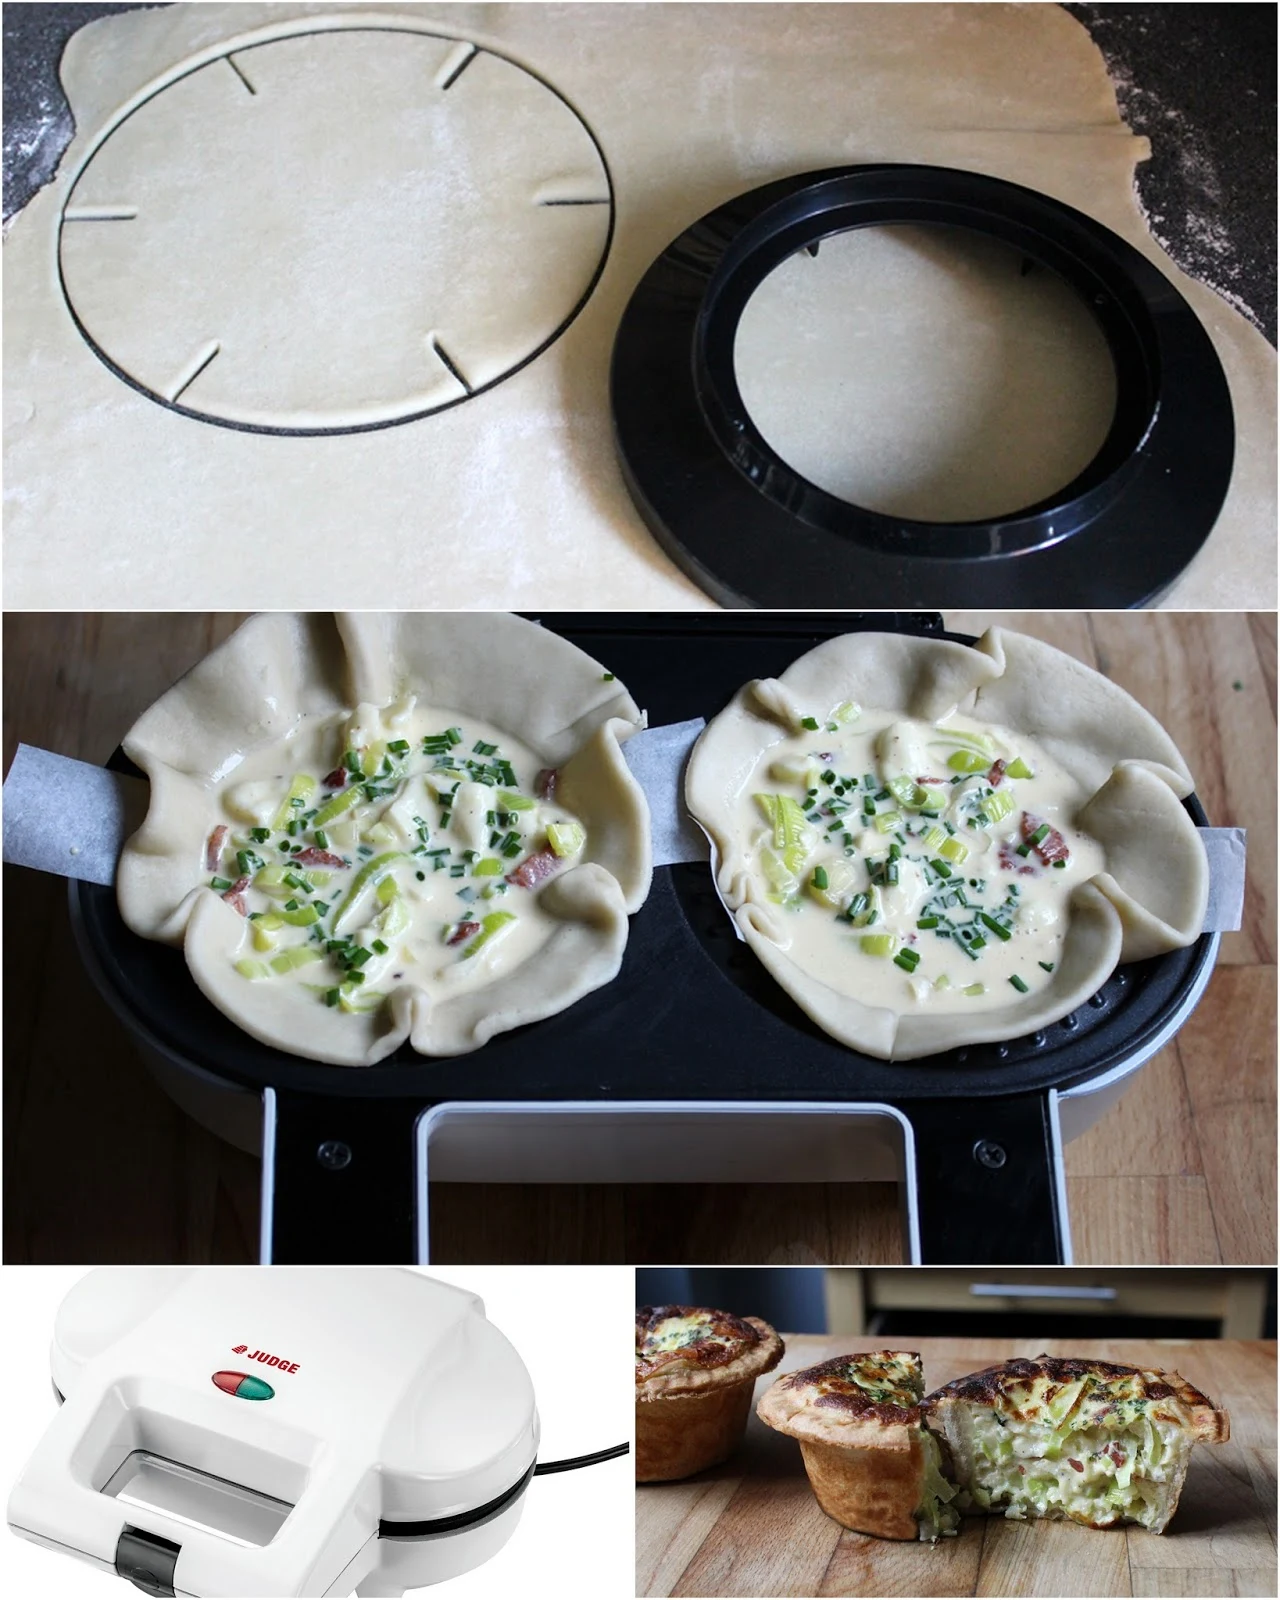 Step by step how to use an electric pie maker